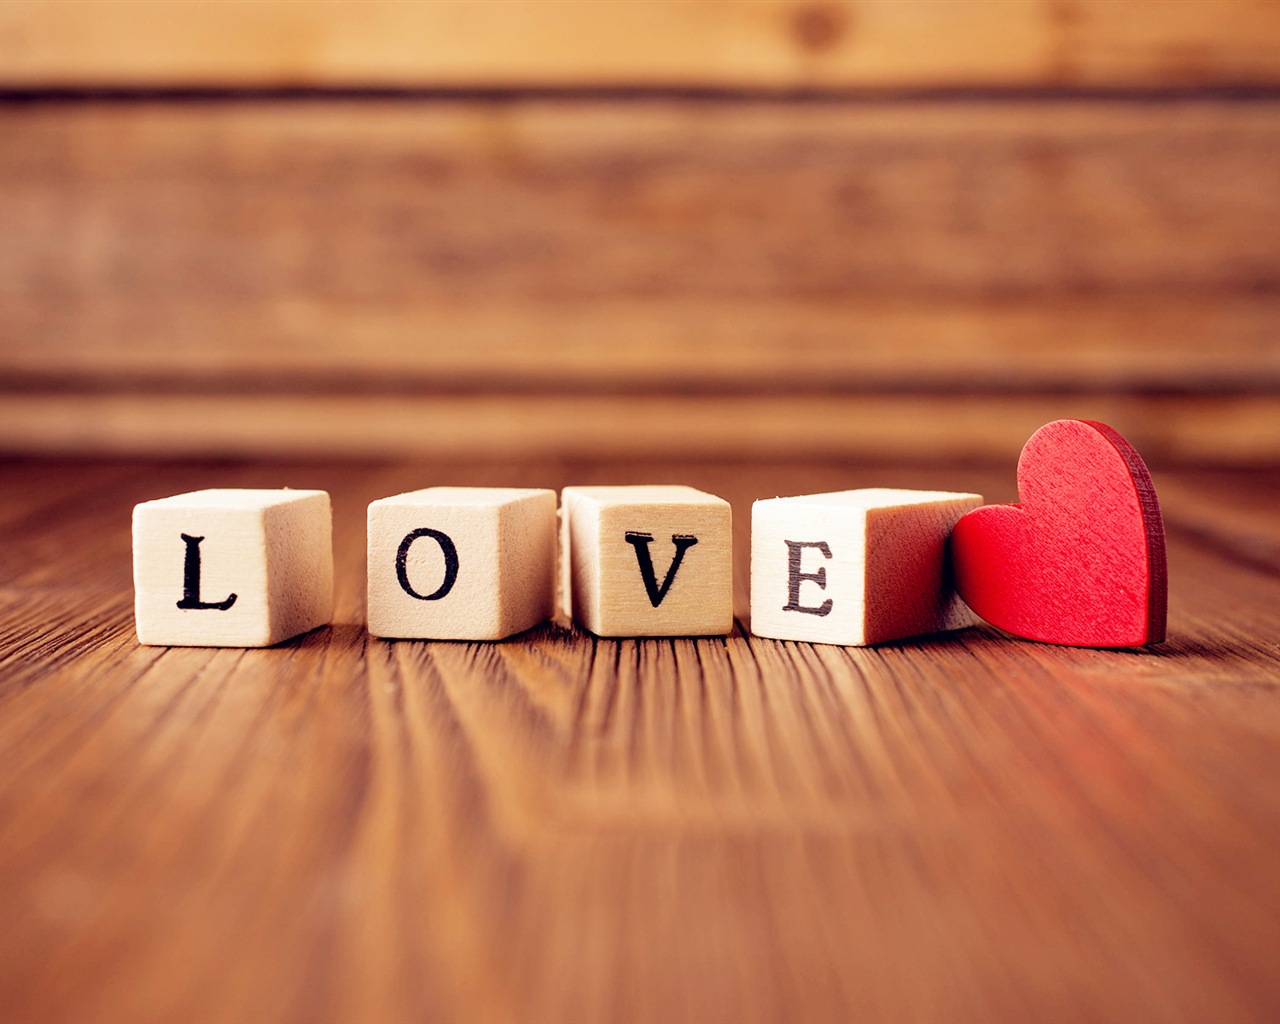 The theme of love, creative heart-shaped HD wallpapers #2 - 1280x1024